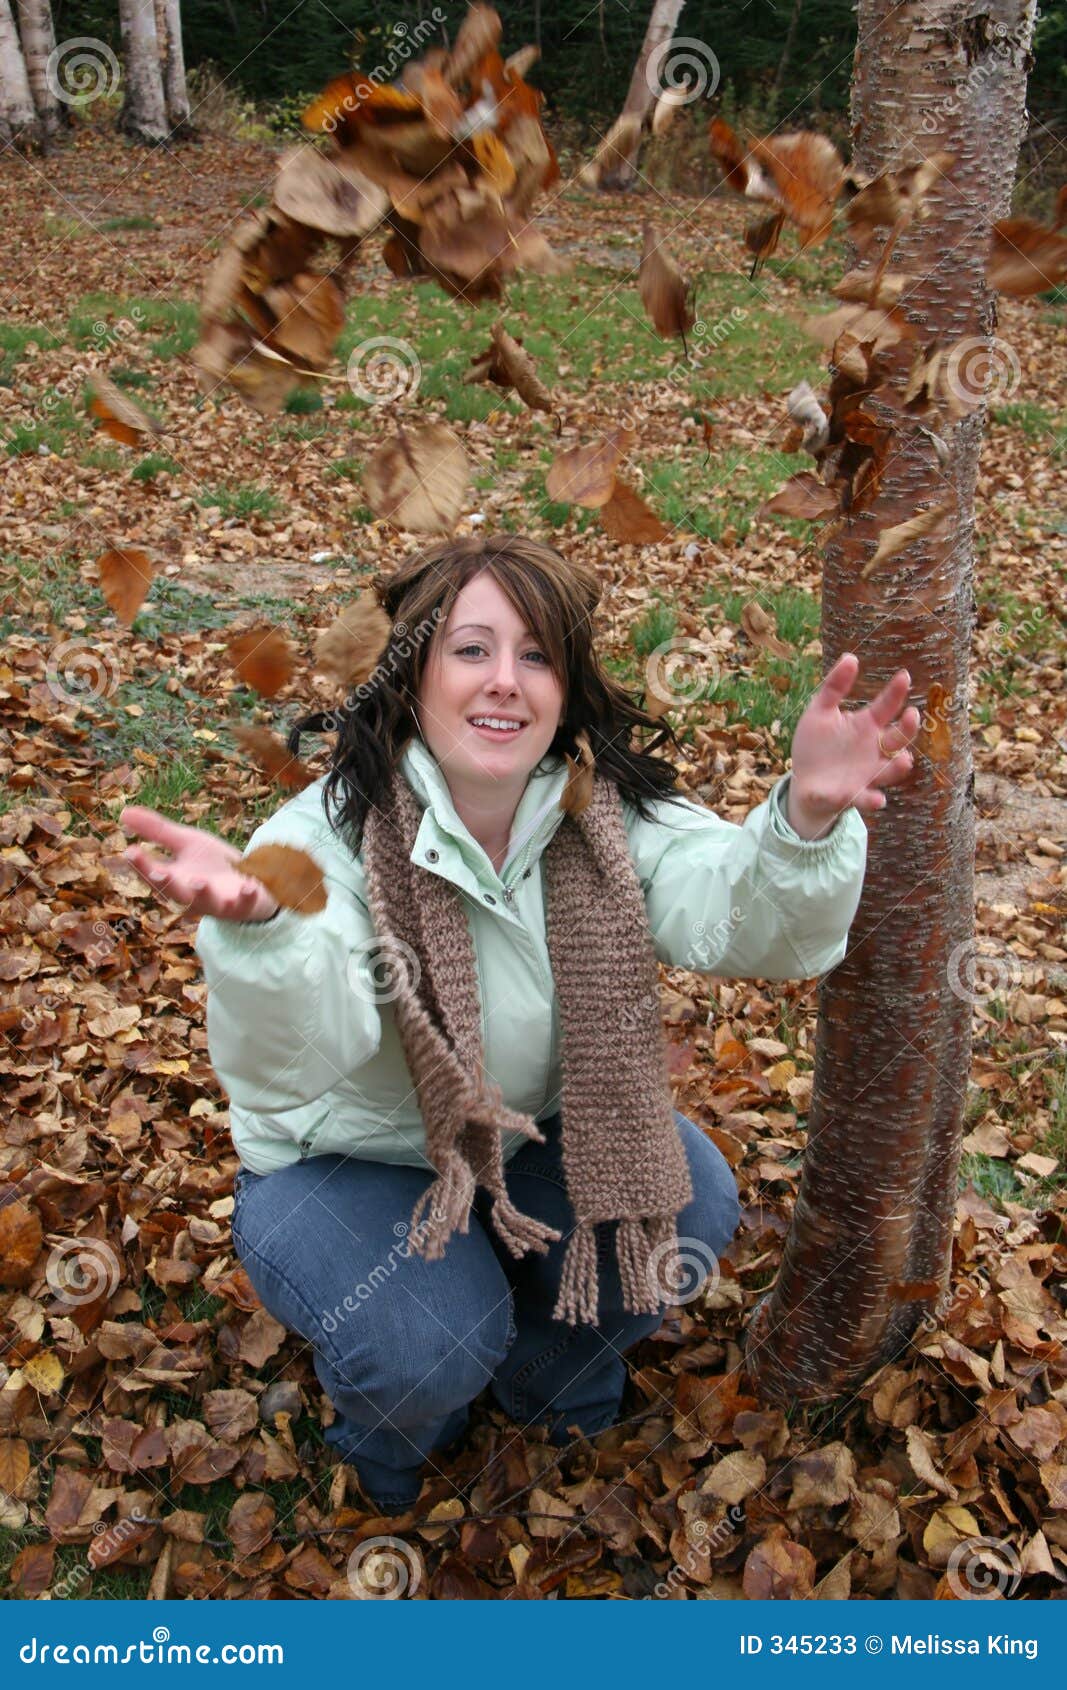 Woman Throwing Autumn Leaves Stock Image - Image of enjoyment, outdoors ...